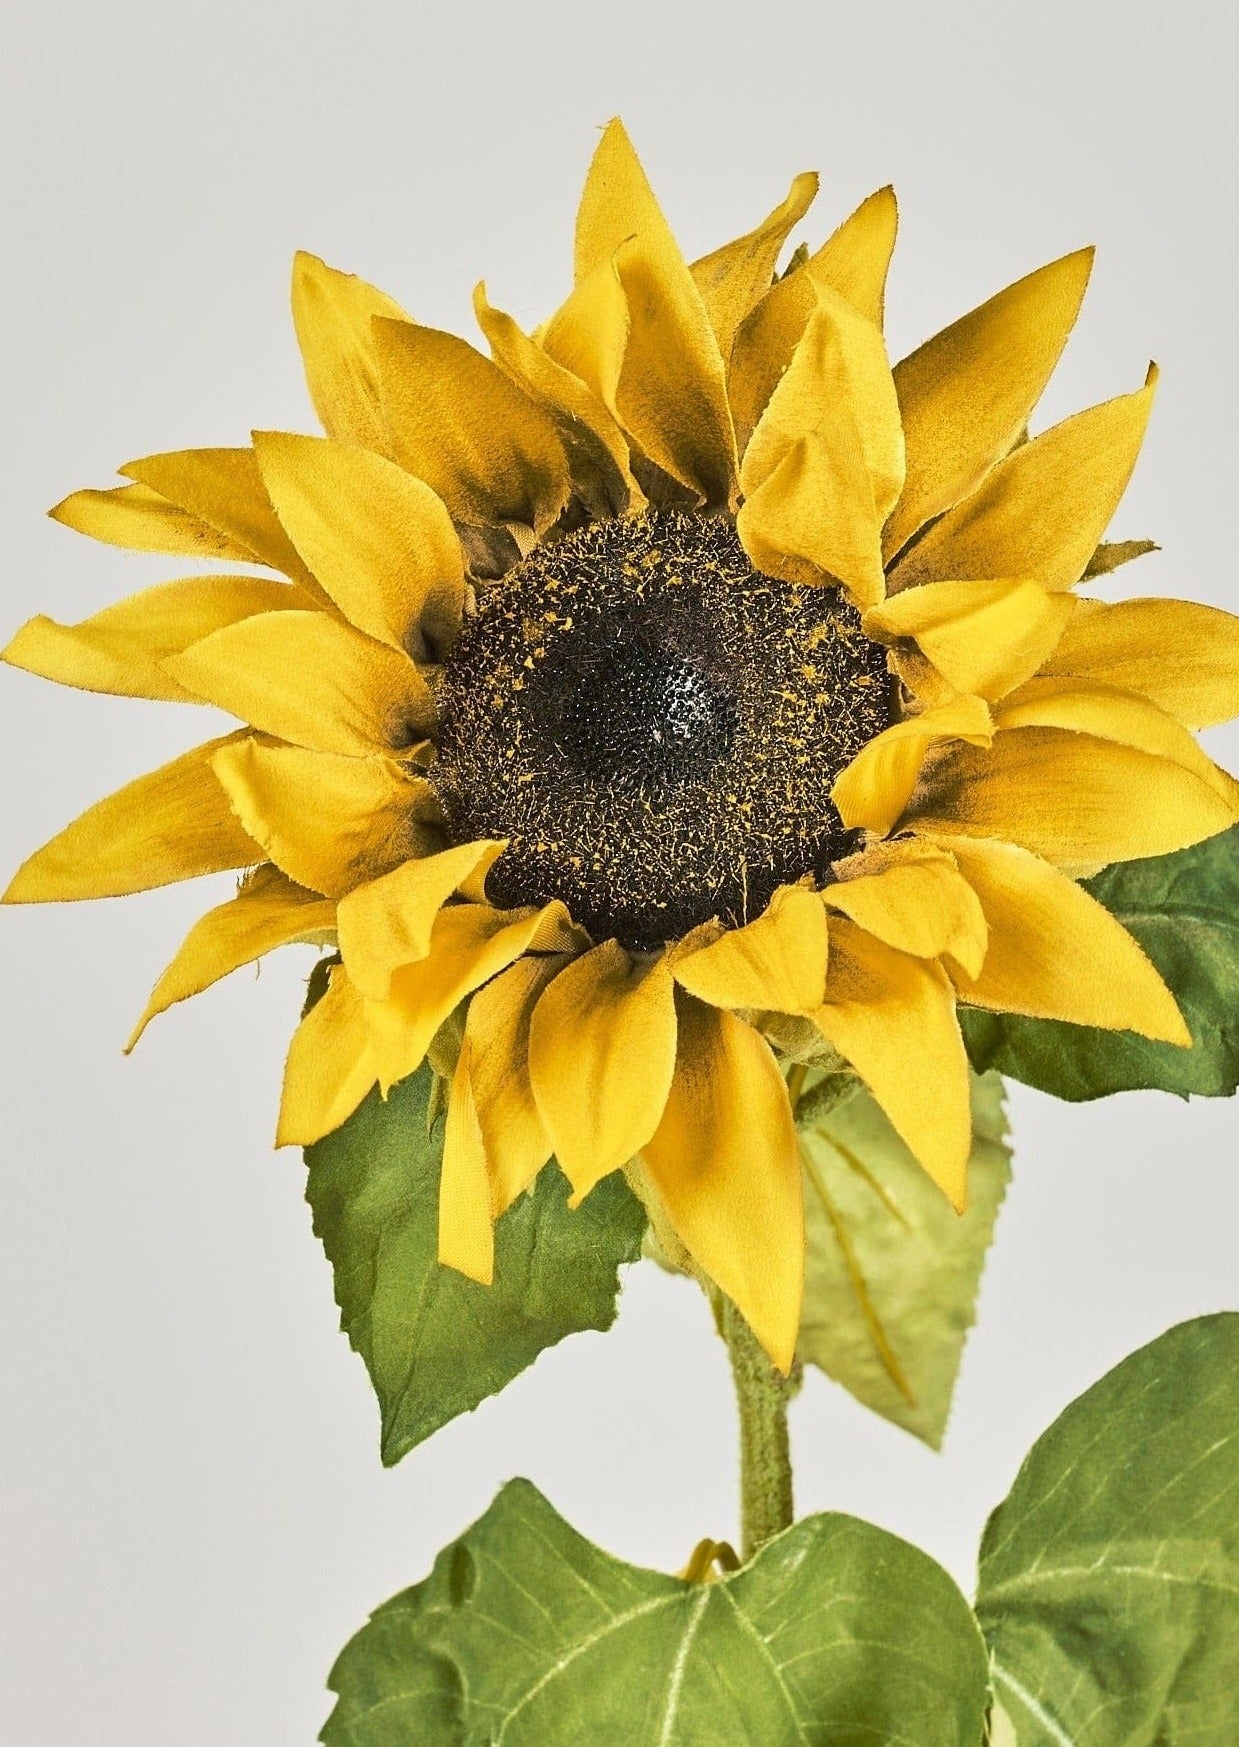 Yellow Artificial Sunflower in Closeup View